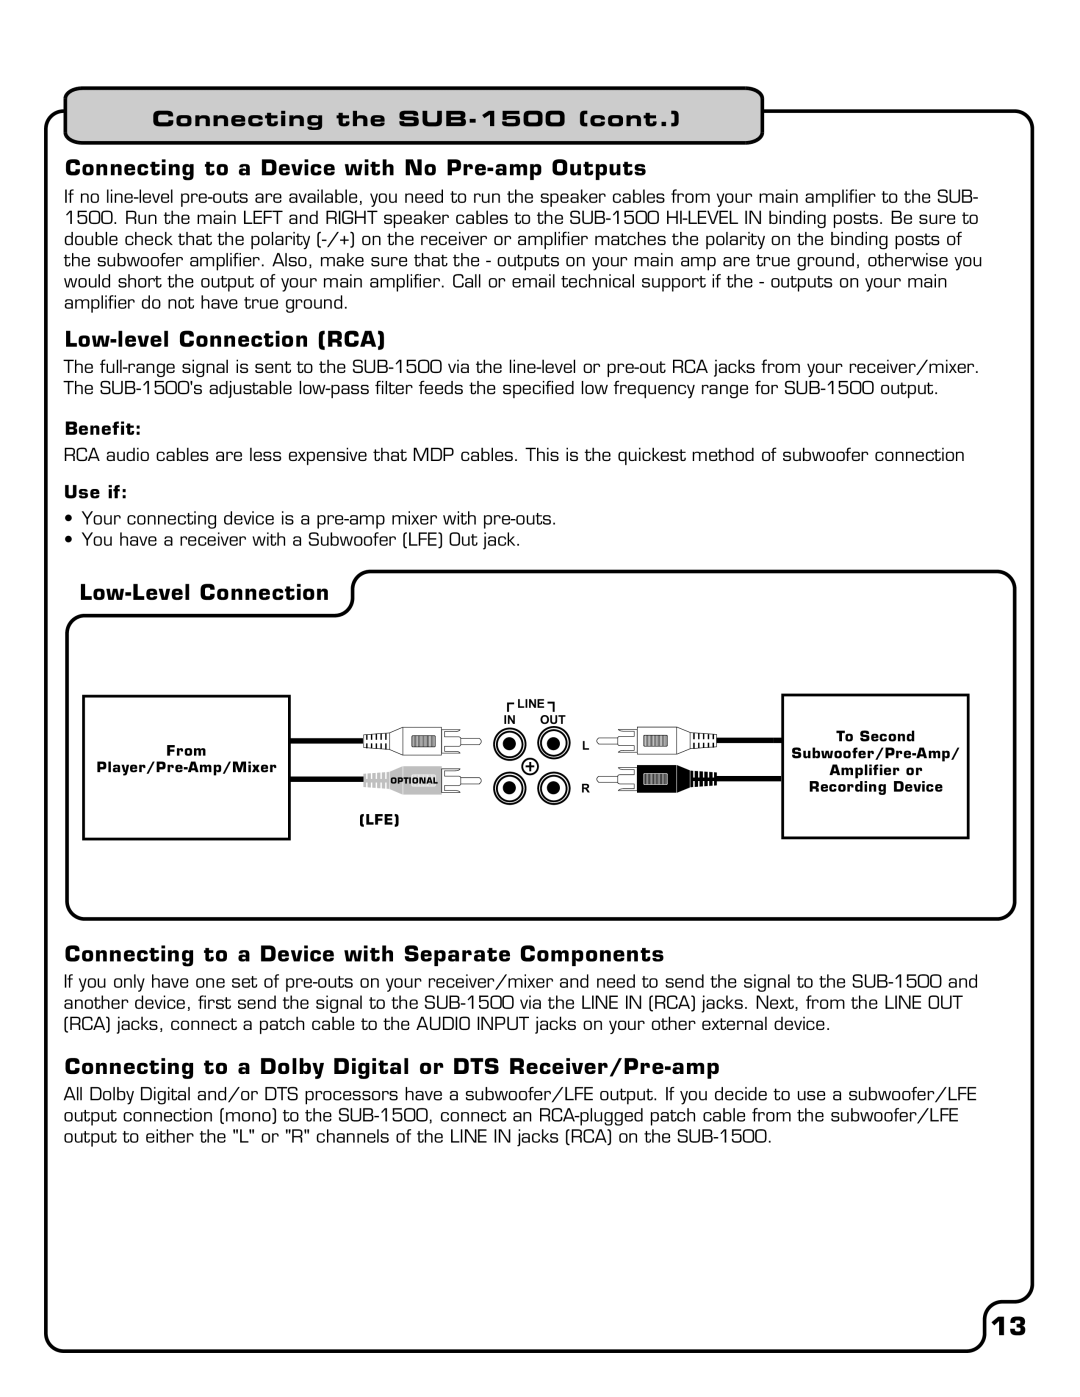 VocoPro owner manual Connecting the SUB-1500cont, Connecting to a Device with No Pre-ampOutputs, Low-levelConnection RCA 